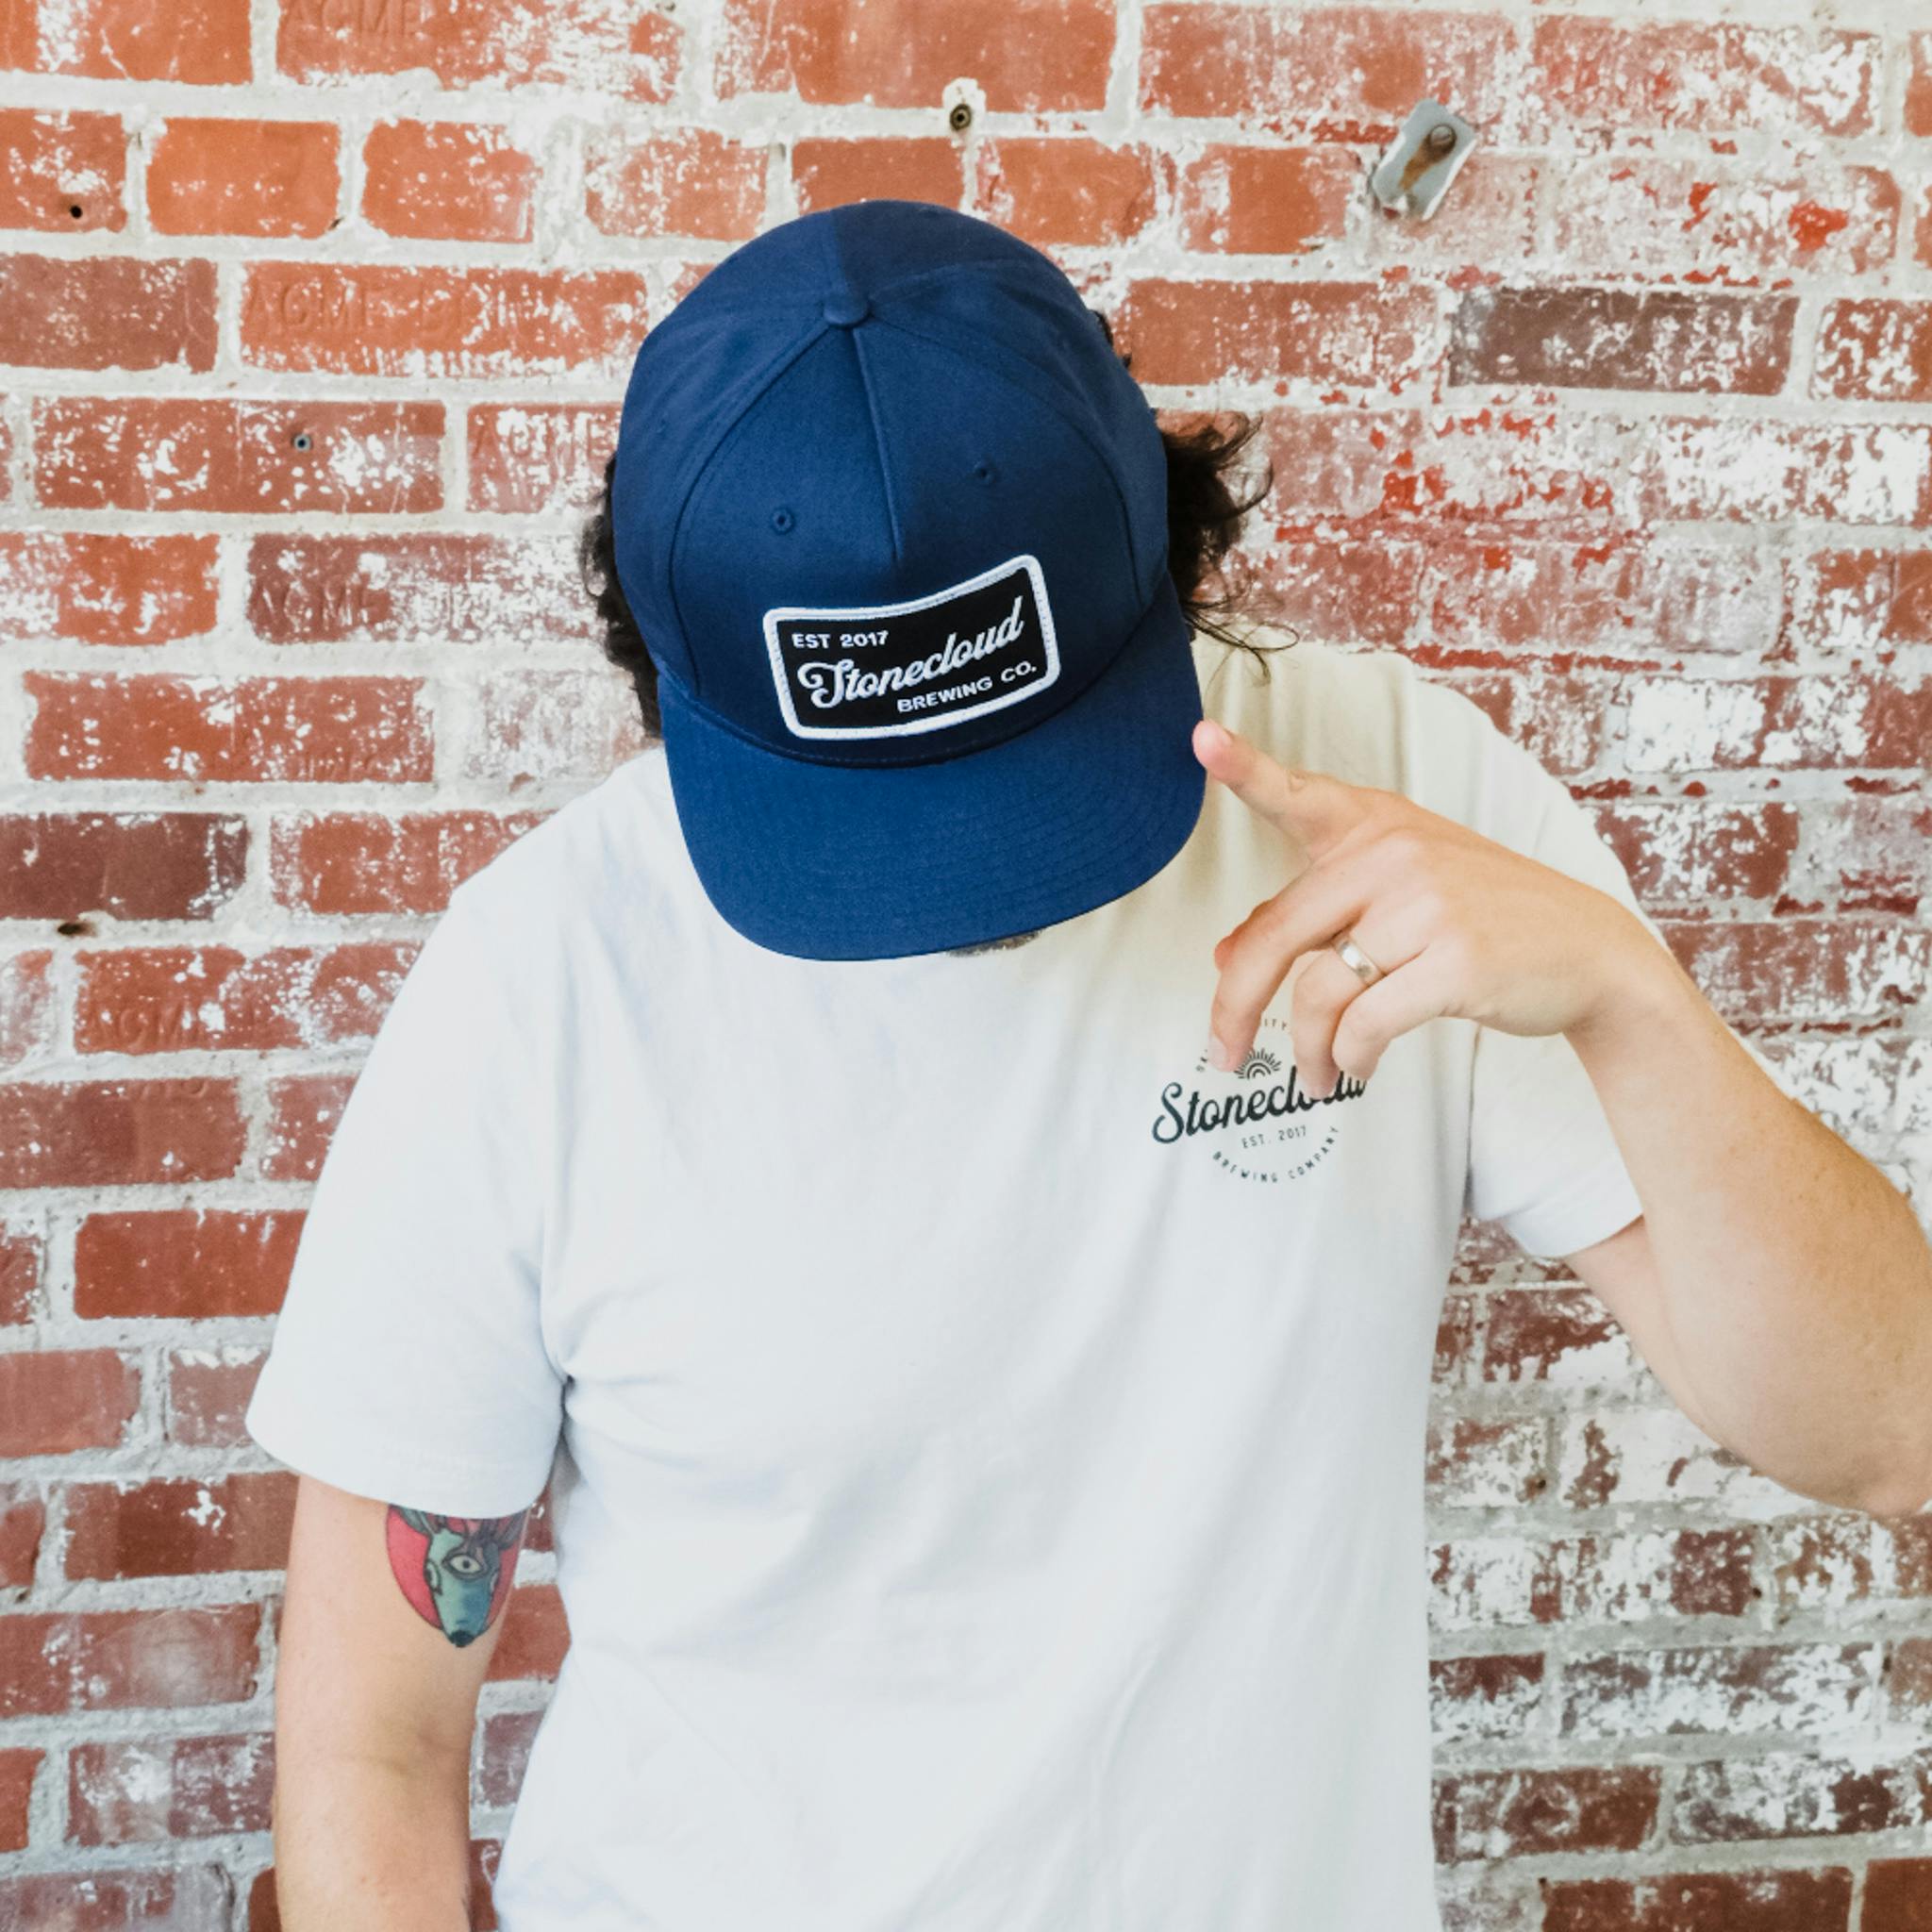 zo veel klei titel 5-Panel Embroidered Patch Hat - Navy | Stonecloud Brewing Co. Online Shop